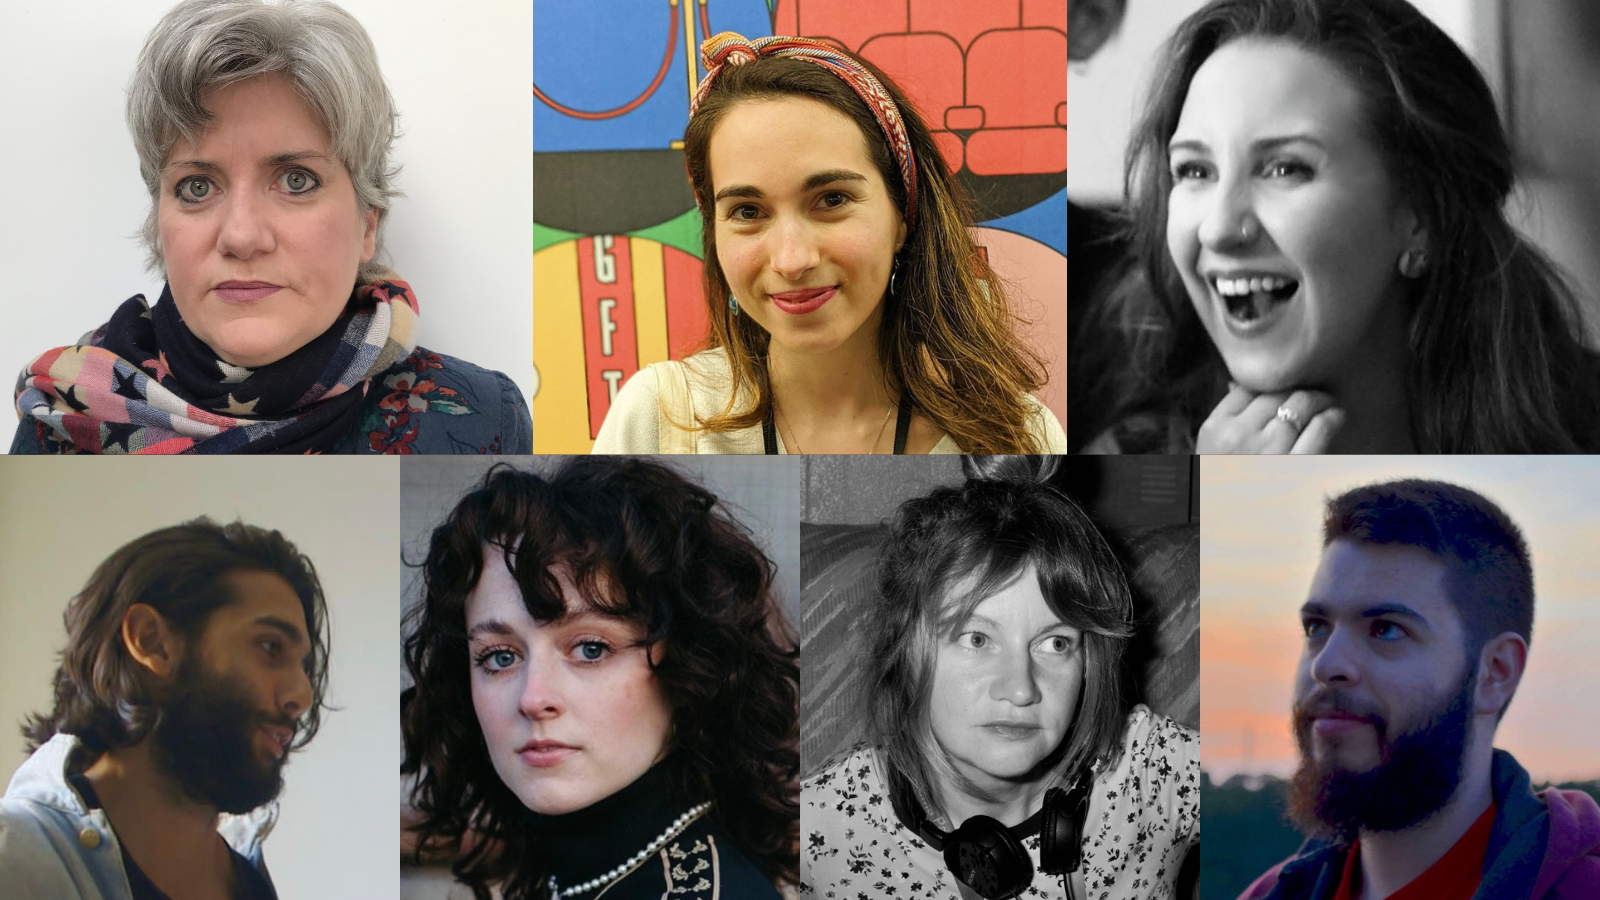 Head shots of the Sharp Shorts 2022 awardees. Left to right on the top row: Ali Taylor, Ana Songel and Ciara Elizabeth Smyth. Left to right on the bottom row: Ciaran Pasi, Eilidh Loan, Lisa Clarkson and Theo Panagopoulos.